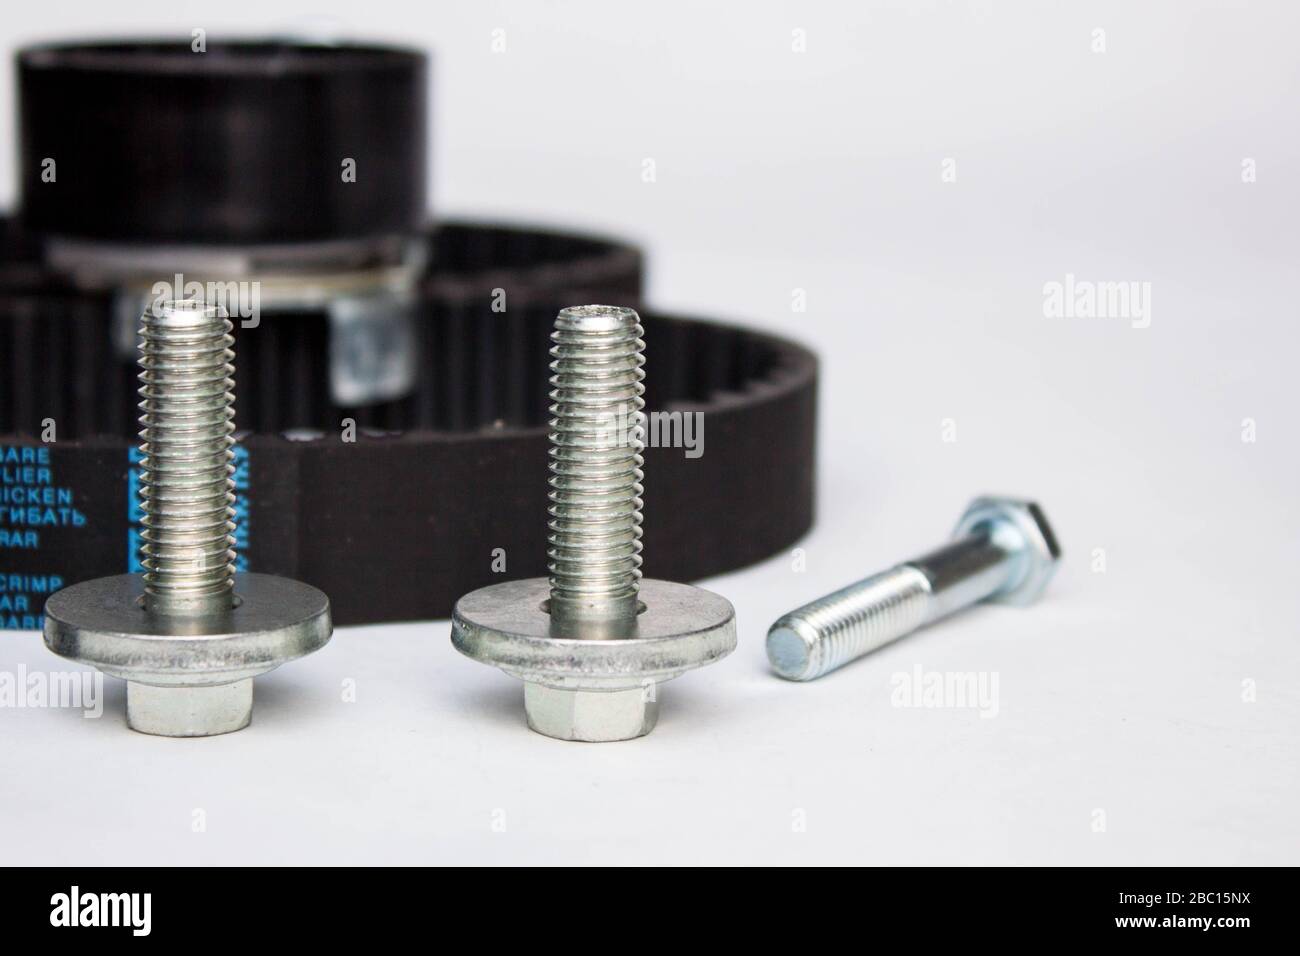 Repair kit: gear belt and bolts isolated on a white background. Stock Photo